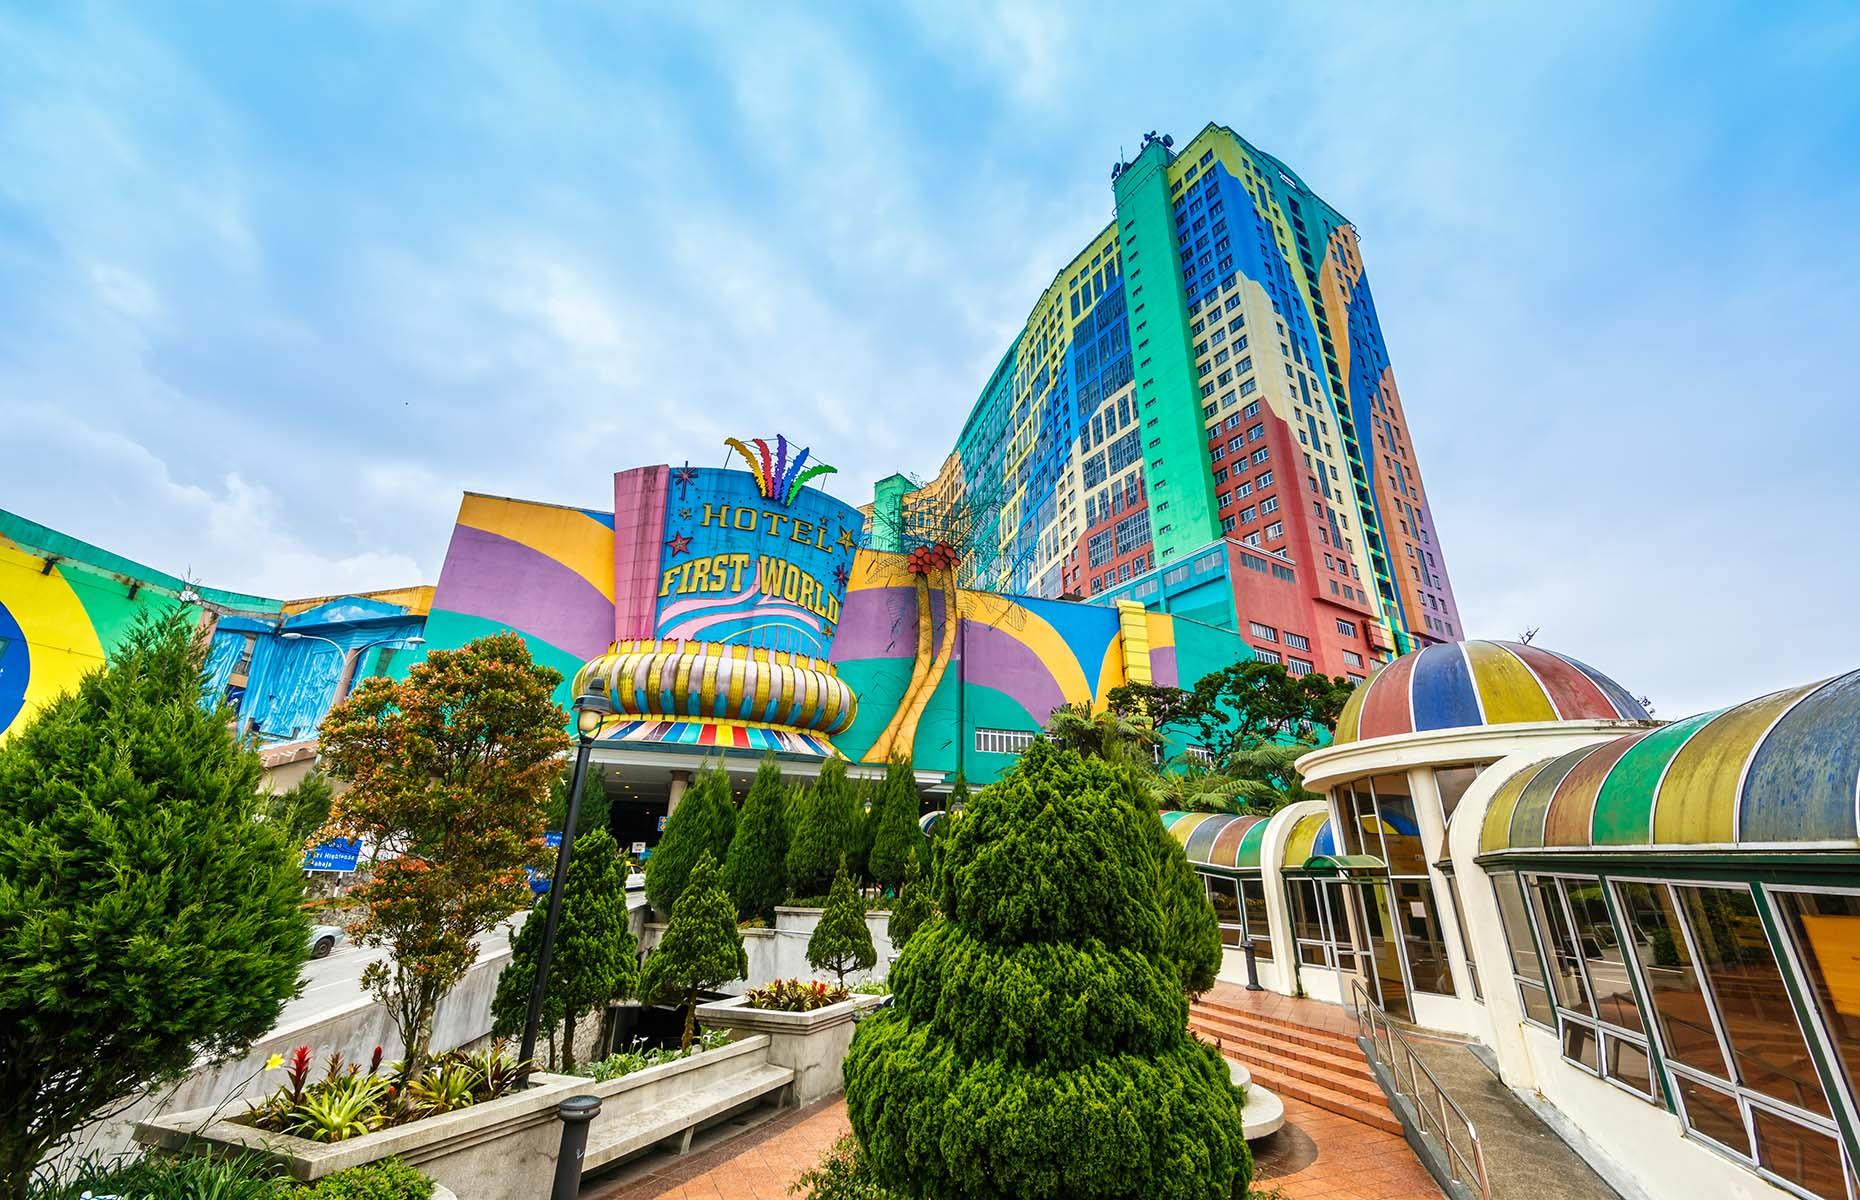 <p>You’ll want to get your bearings quickly at this mammoth hotel in Malaysia. Officially the largest hotel in the world, First World Hotel is part of Resorts World Genting and has a staggering 7,351 guest rooms among its three rainbow-colored towers. There’s no extravagance in this functional hotel that just has the expected amenities. It’s located in the Genting Highlands, a popular resort perched on Mount Ulu Kali, an hour north of Kuala Lumpur. The area is home to a number of theme parks, casinos and attractions, as well as gorgeous hiking trails and waterfalls.</p>  <p><a href="https://www.loveexploring.com/galleries/106430/the-worlds-most-expensive-hotel-suites?page=1"><strong>Now discover the world's most expensive hotel suites</strong></a></p>